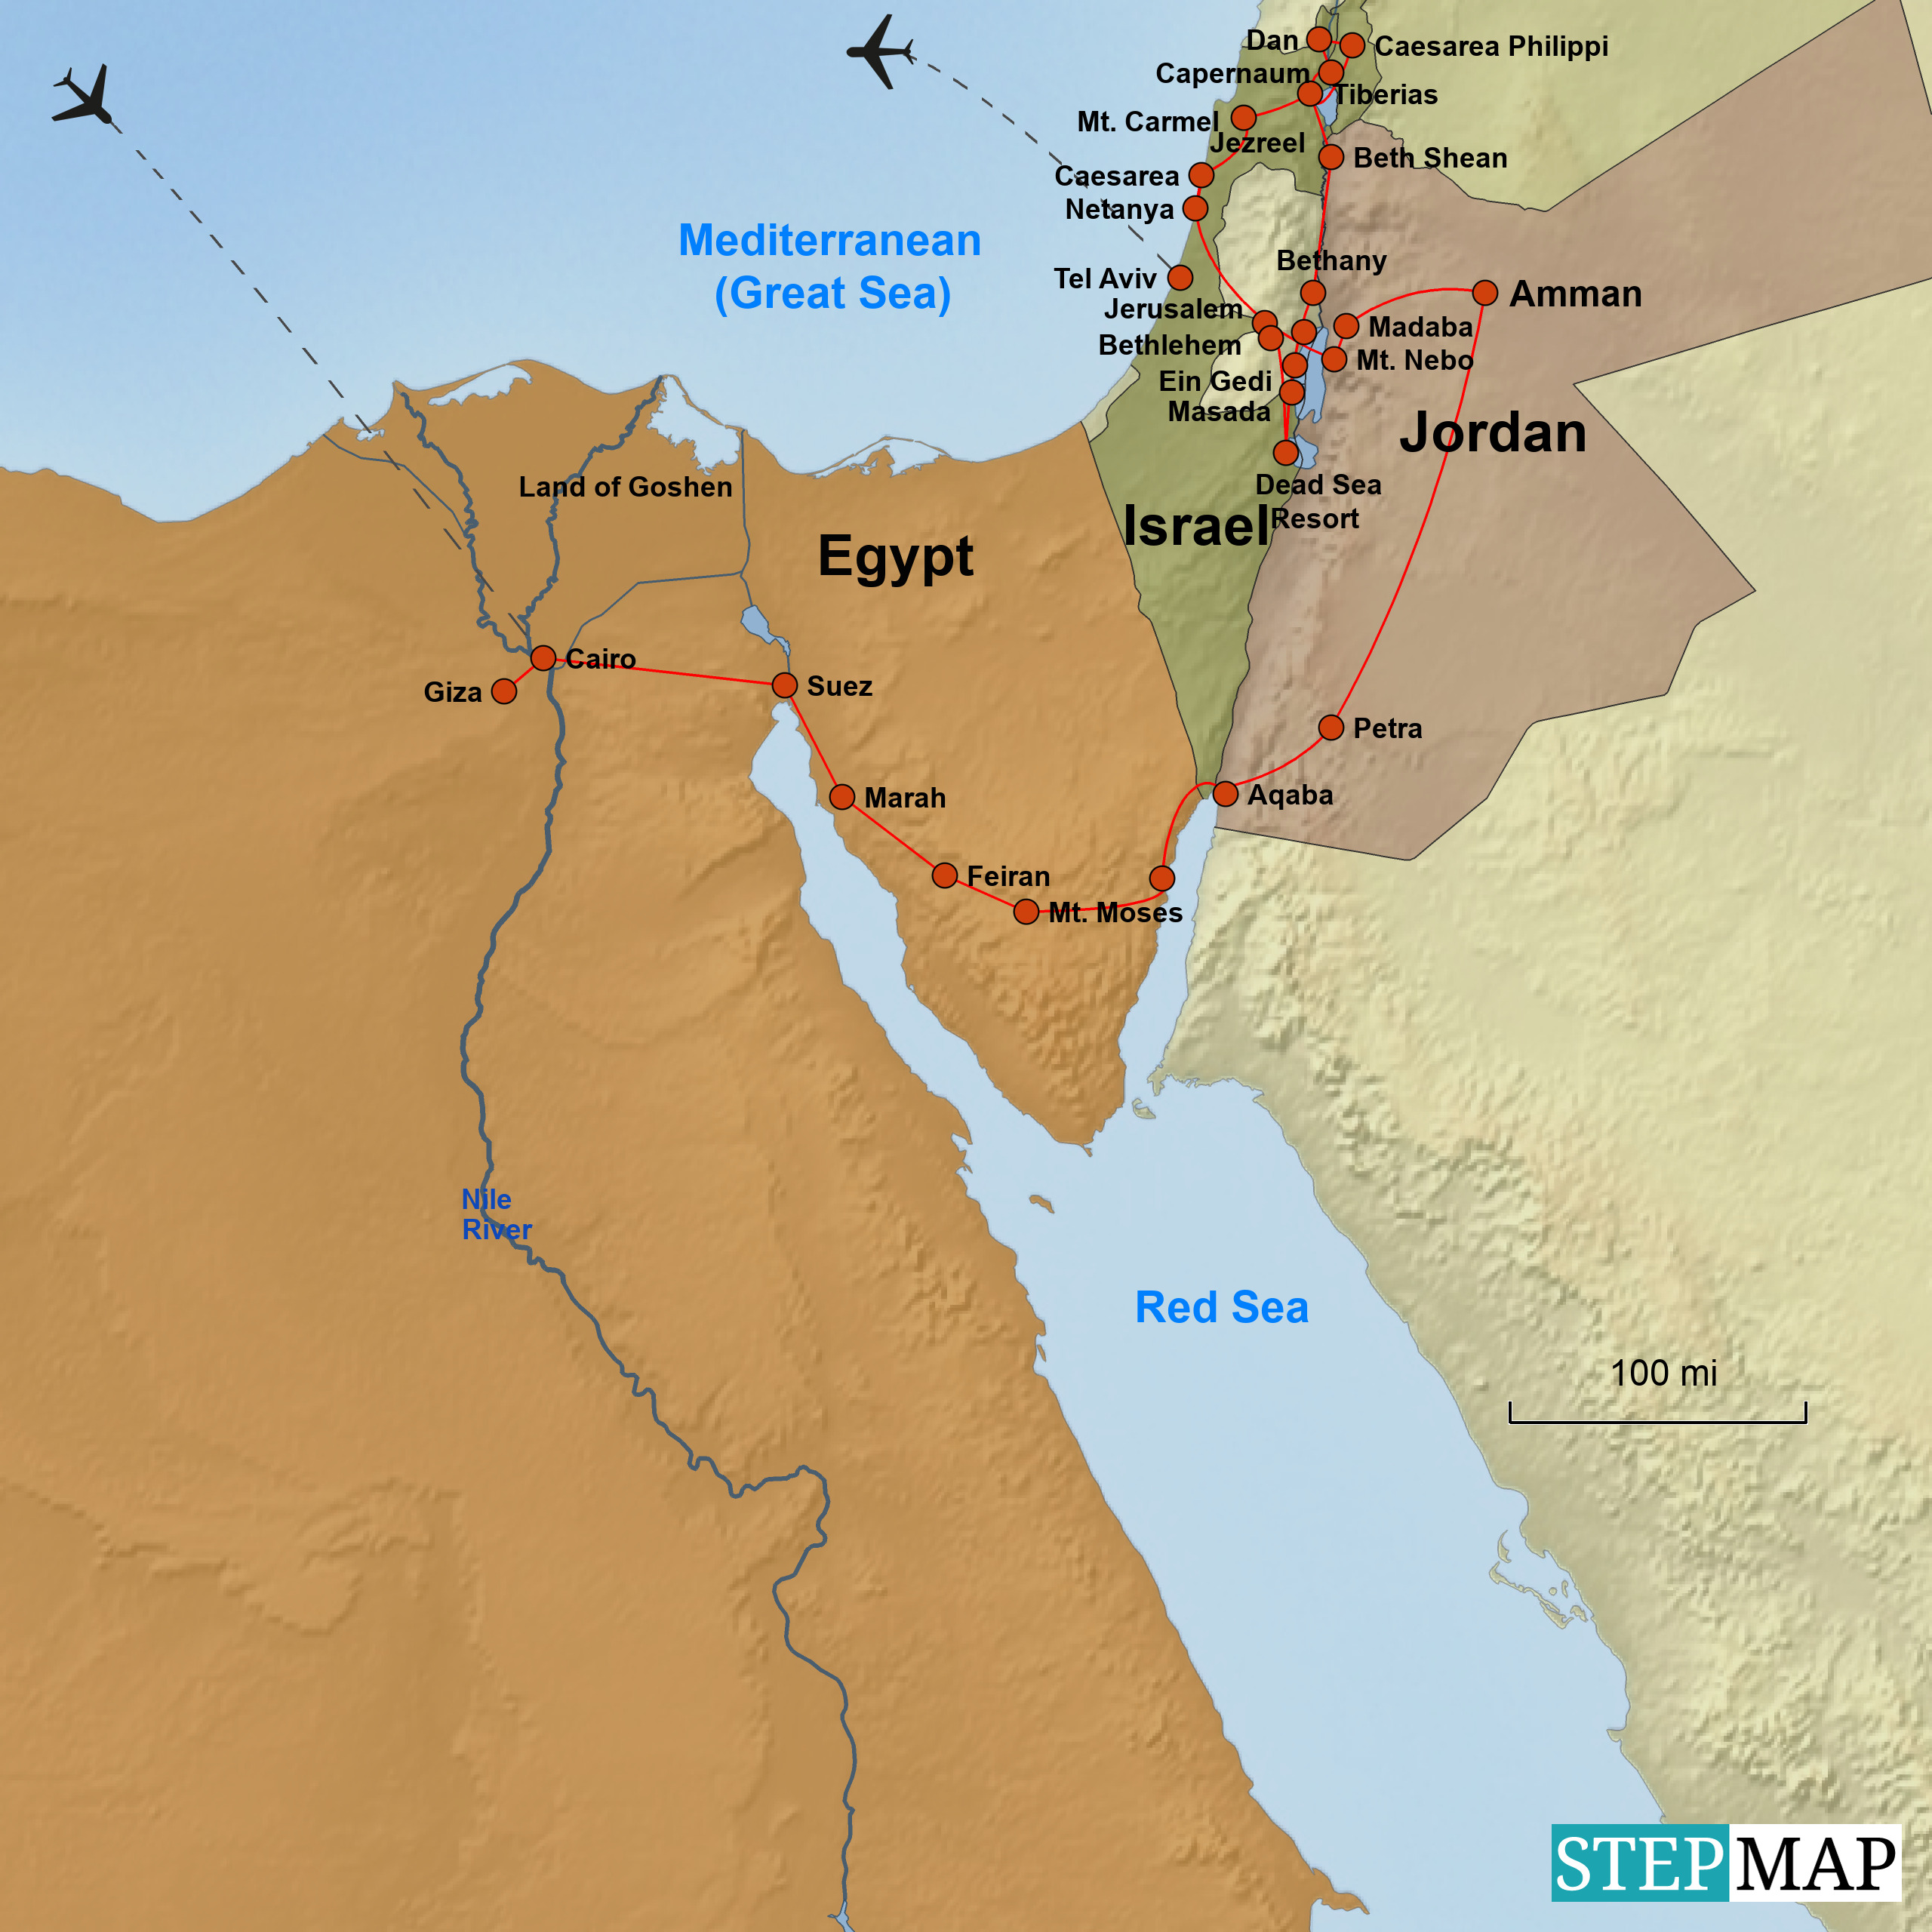 tour of israel and egypt